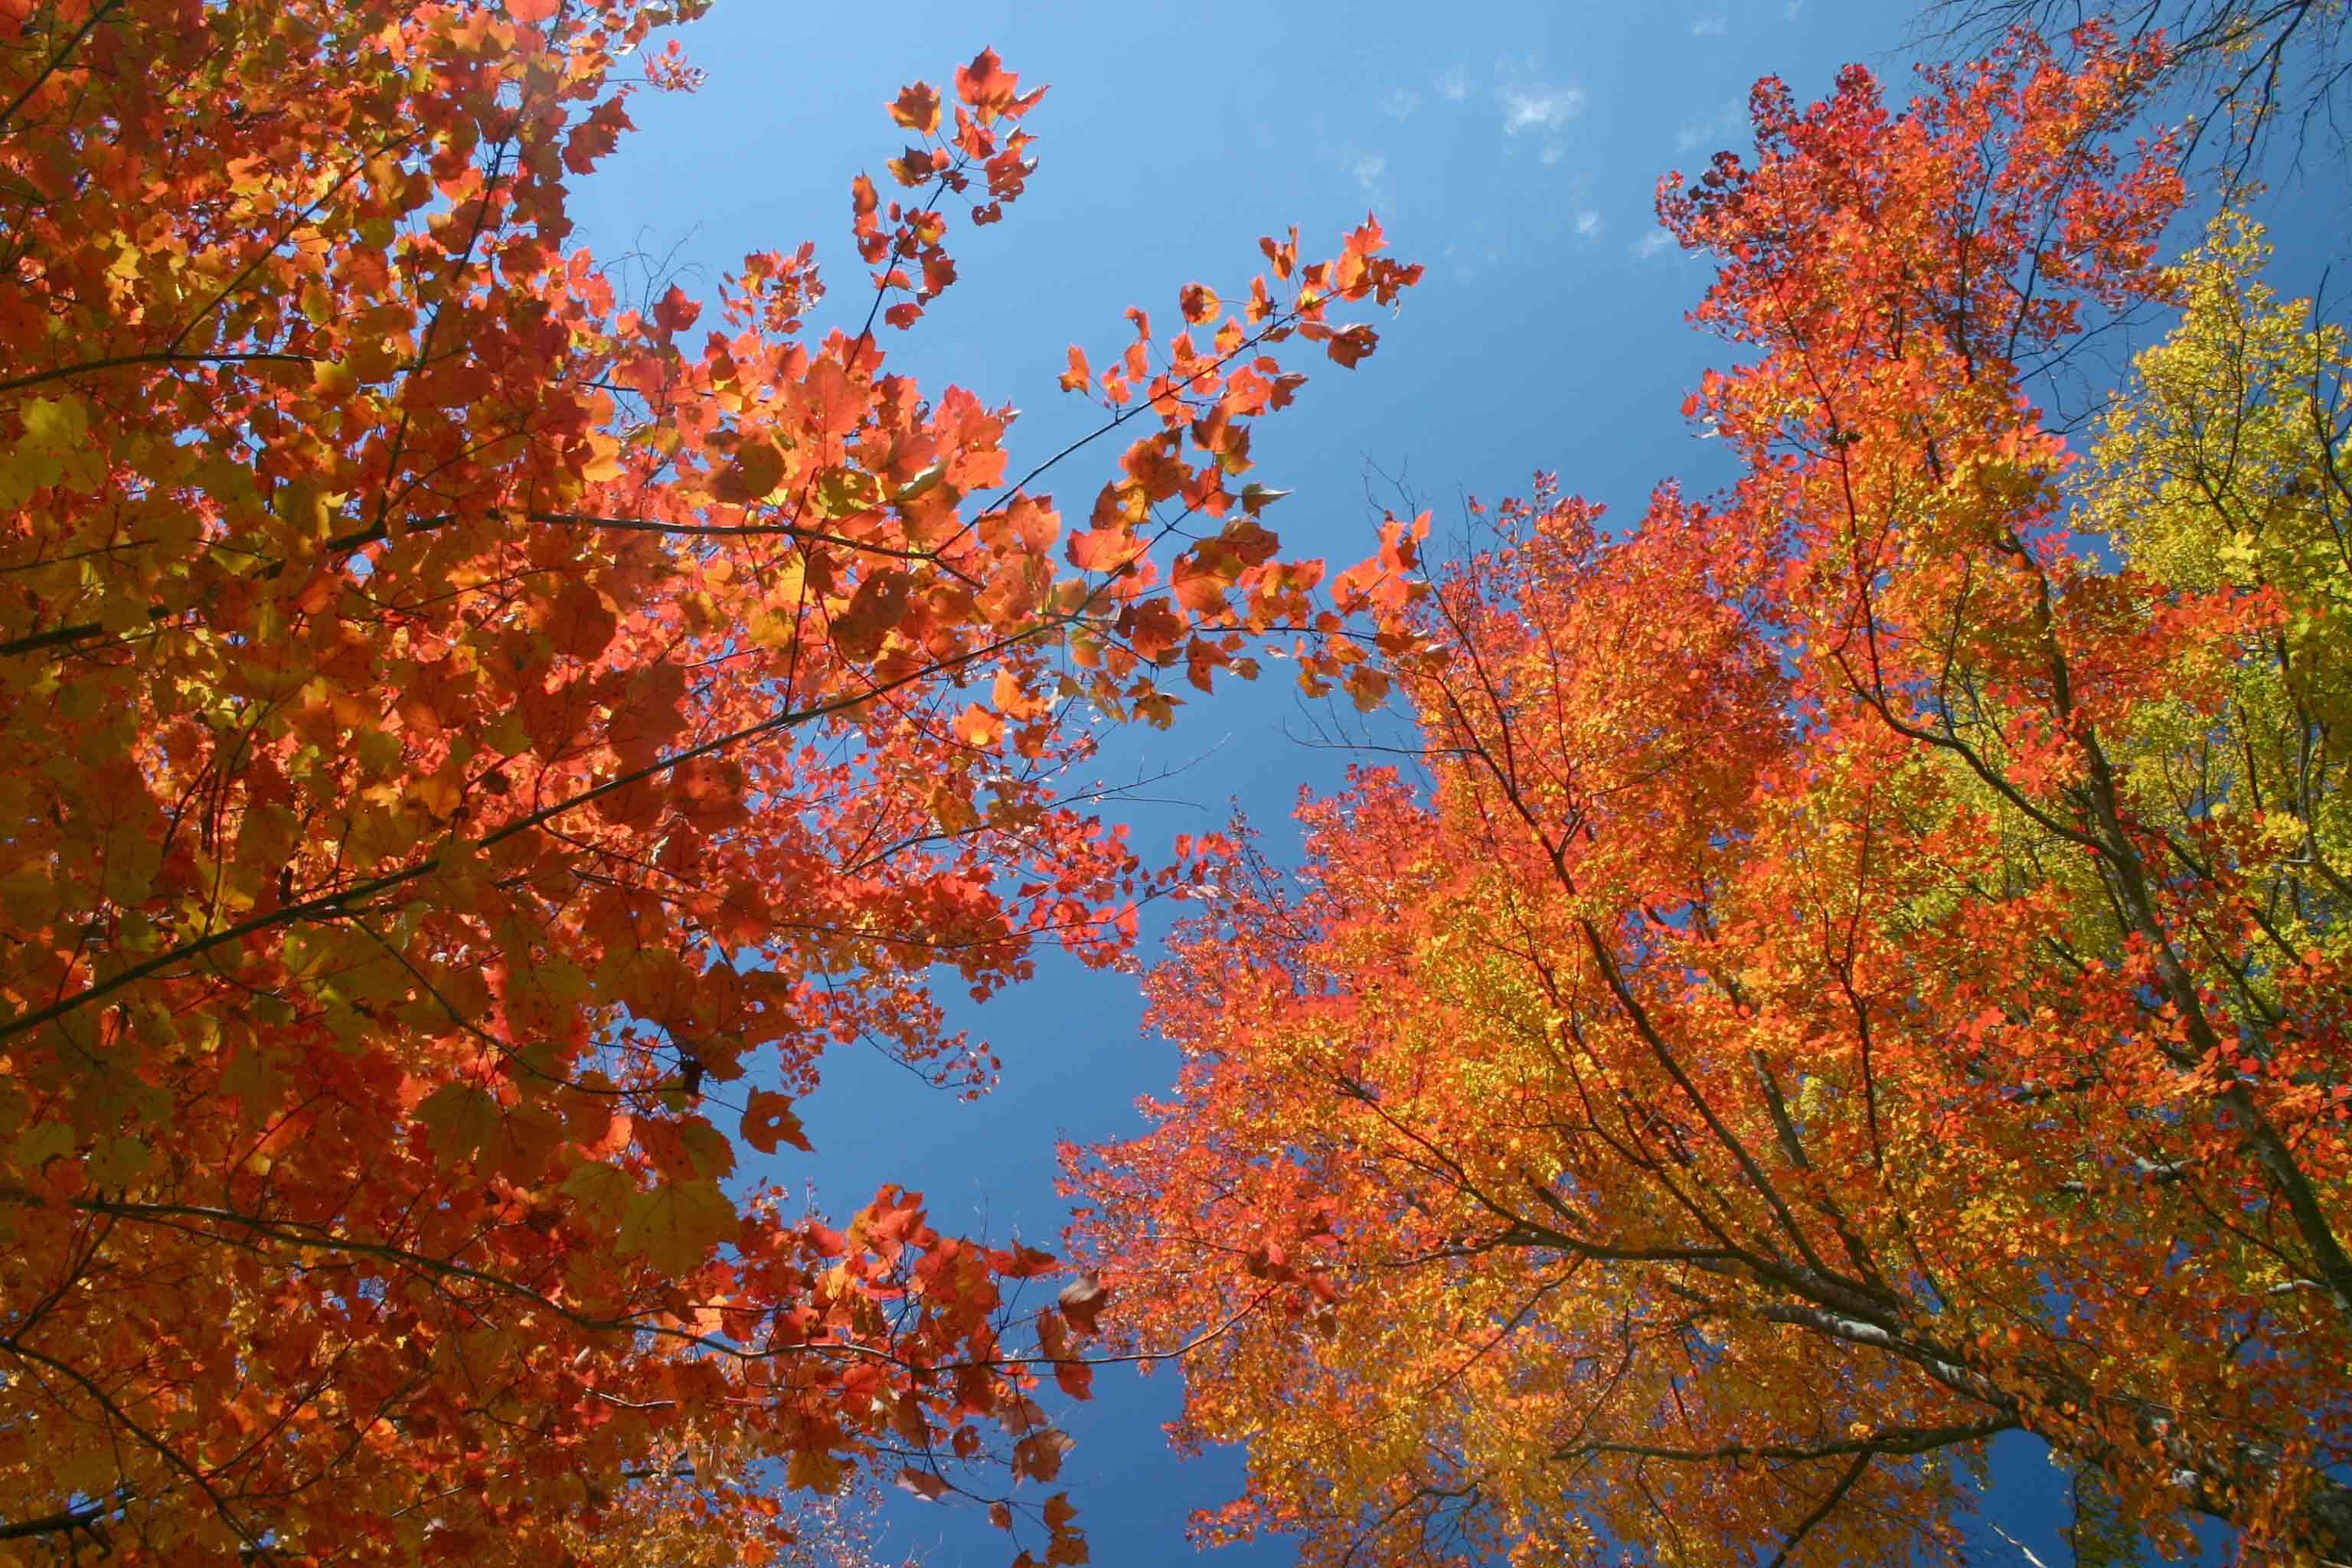 Blue Sky and Leaves - New England Today